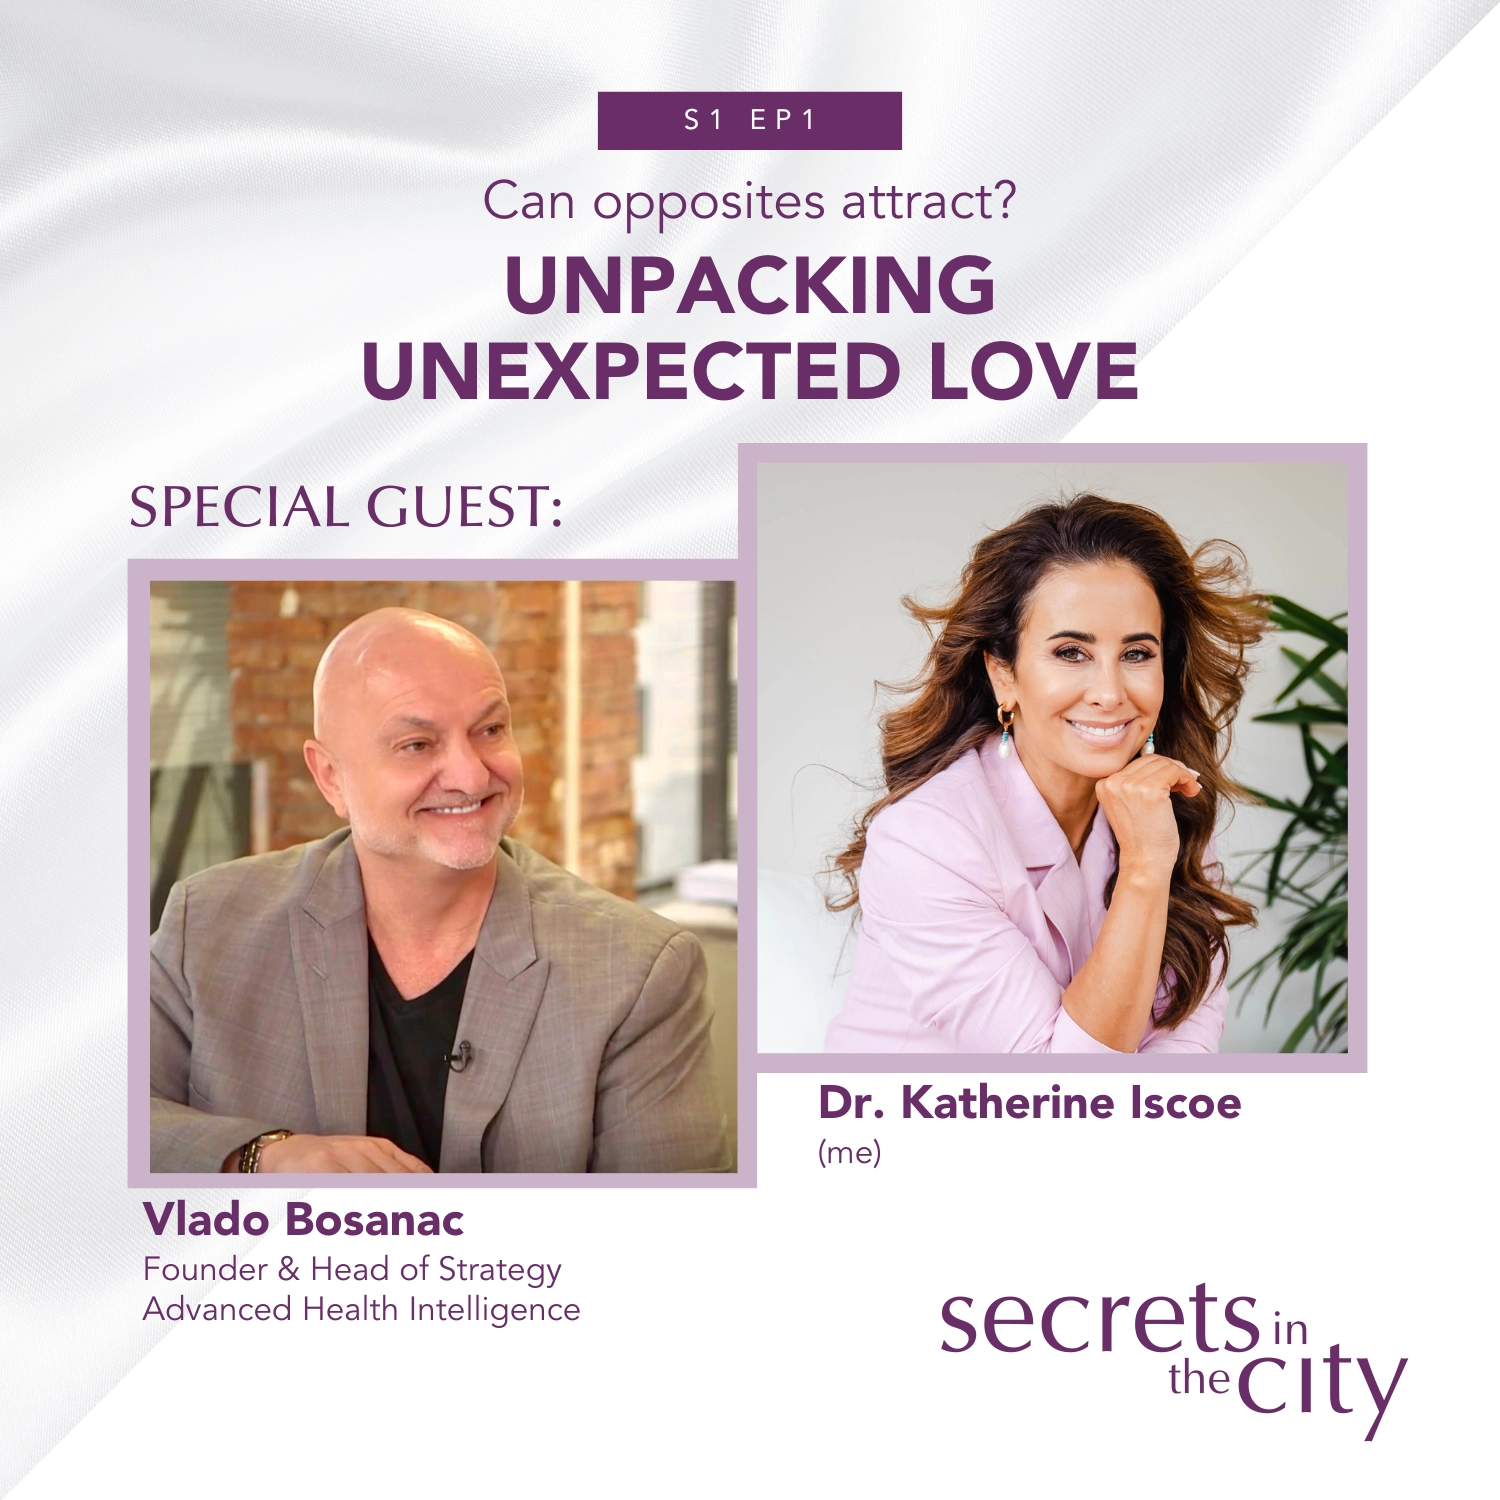 Secrets in the City podcast cover featuring photos of Vlado Bosanac and Dr. Katherine Iscoe